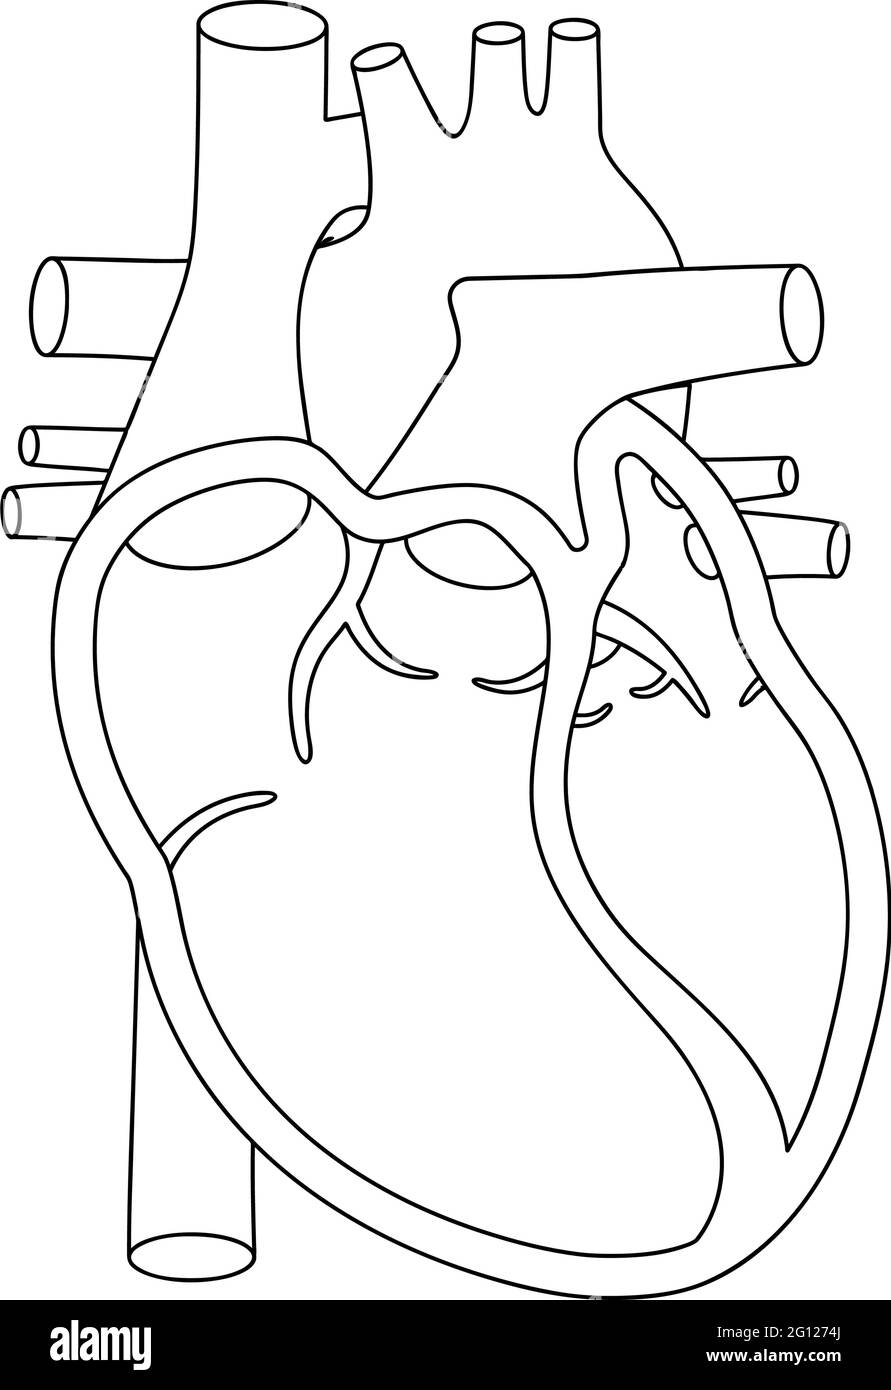 Human heart illustration. Anatomically correct heart with cross-section view. Stock Vector